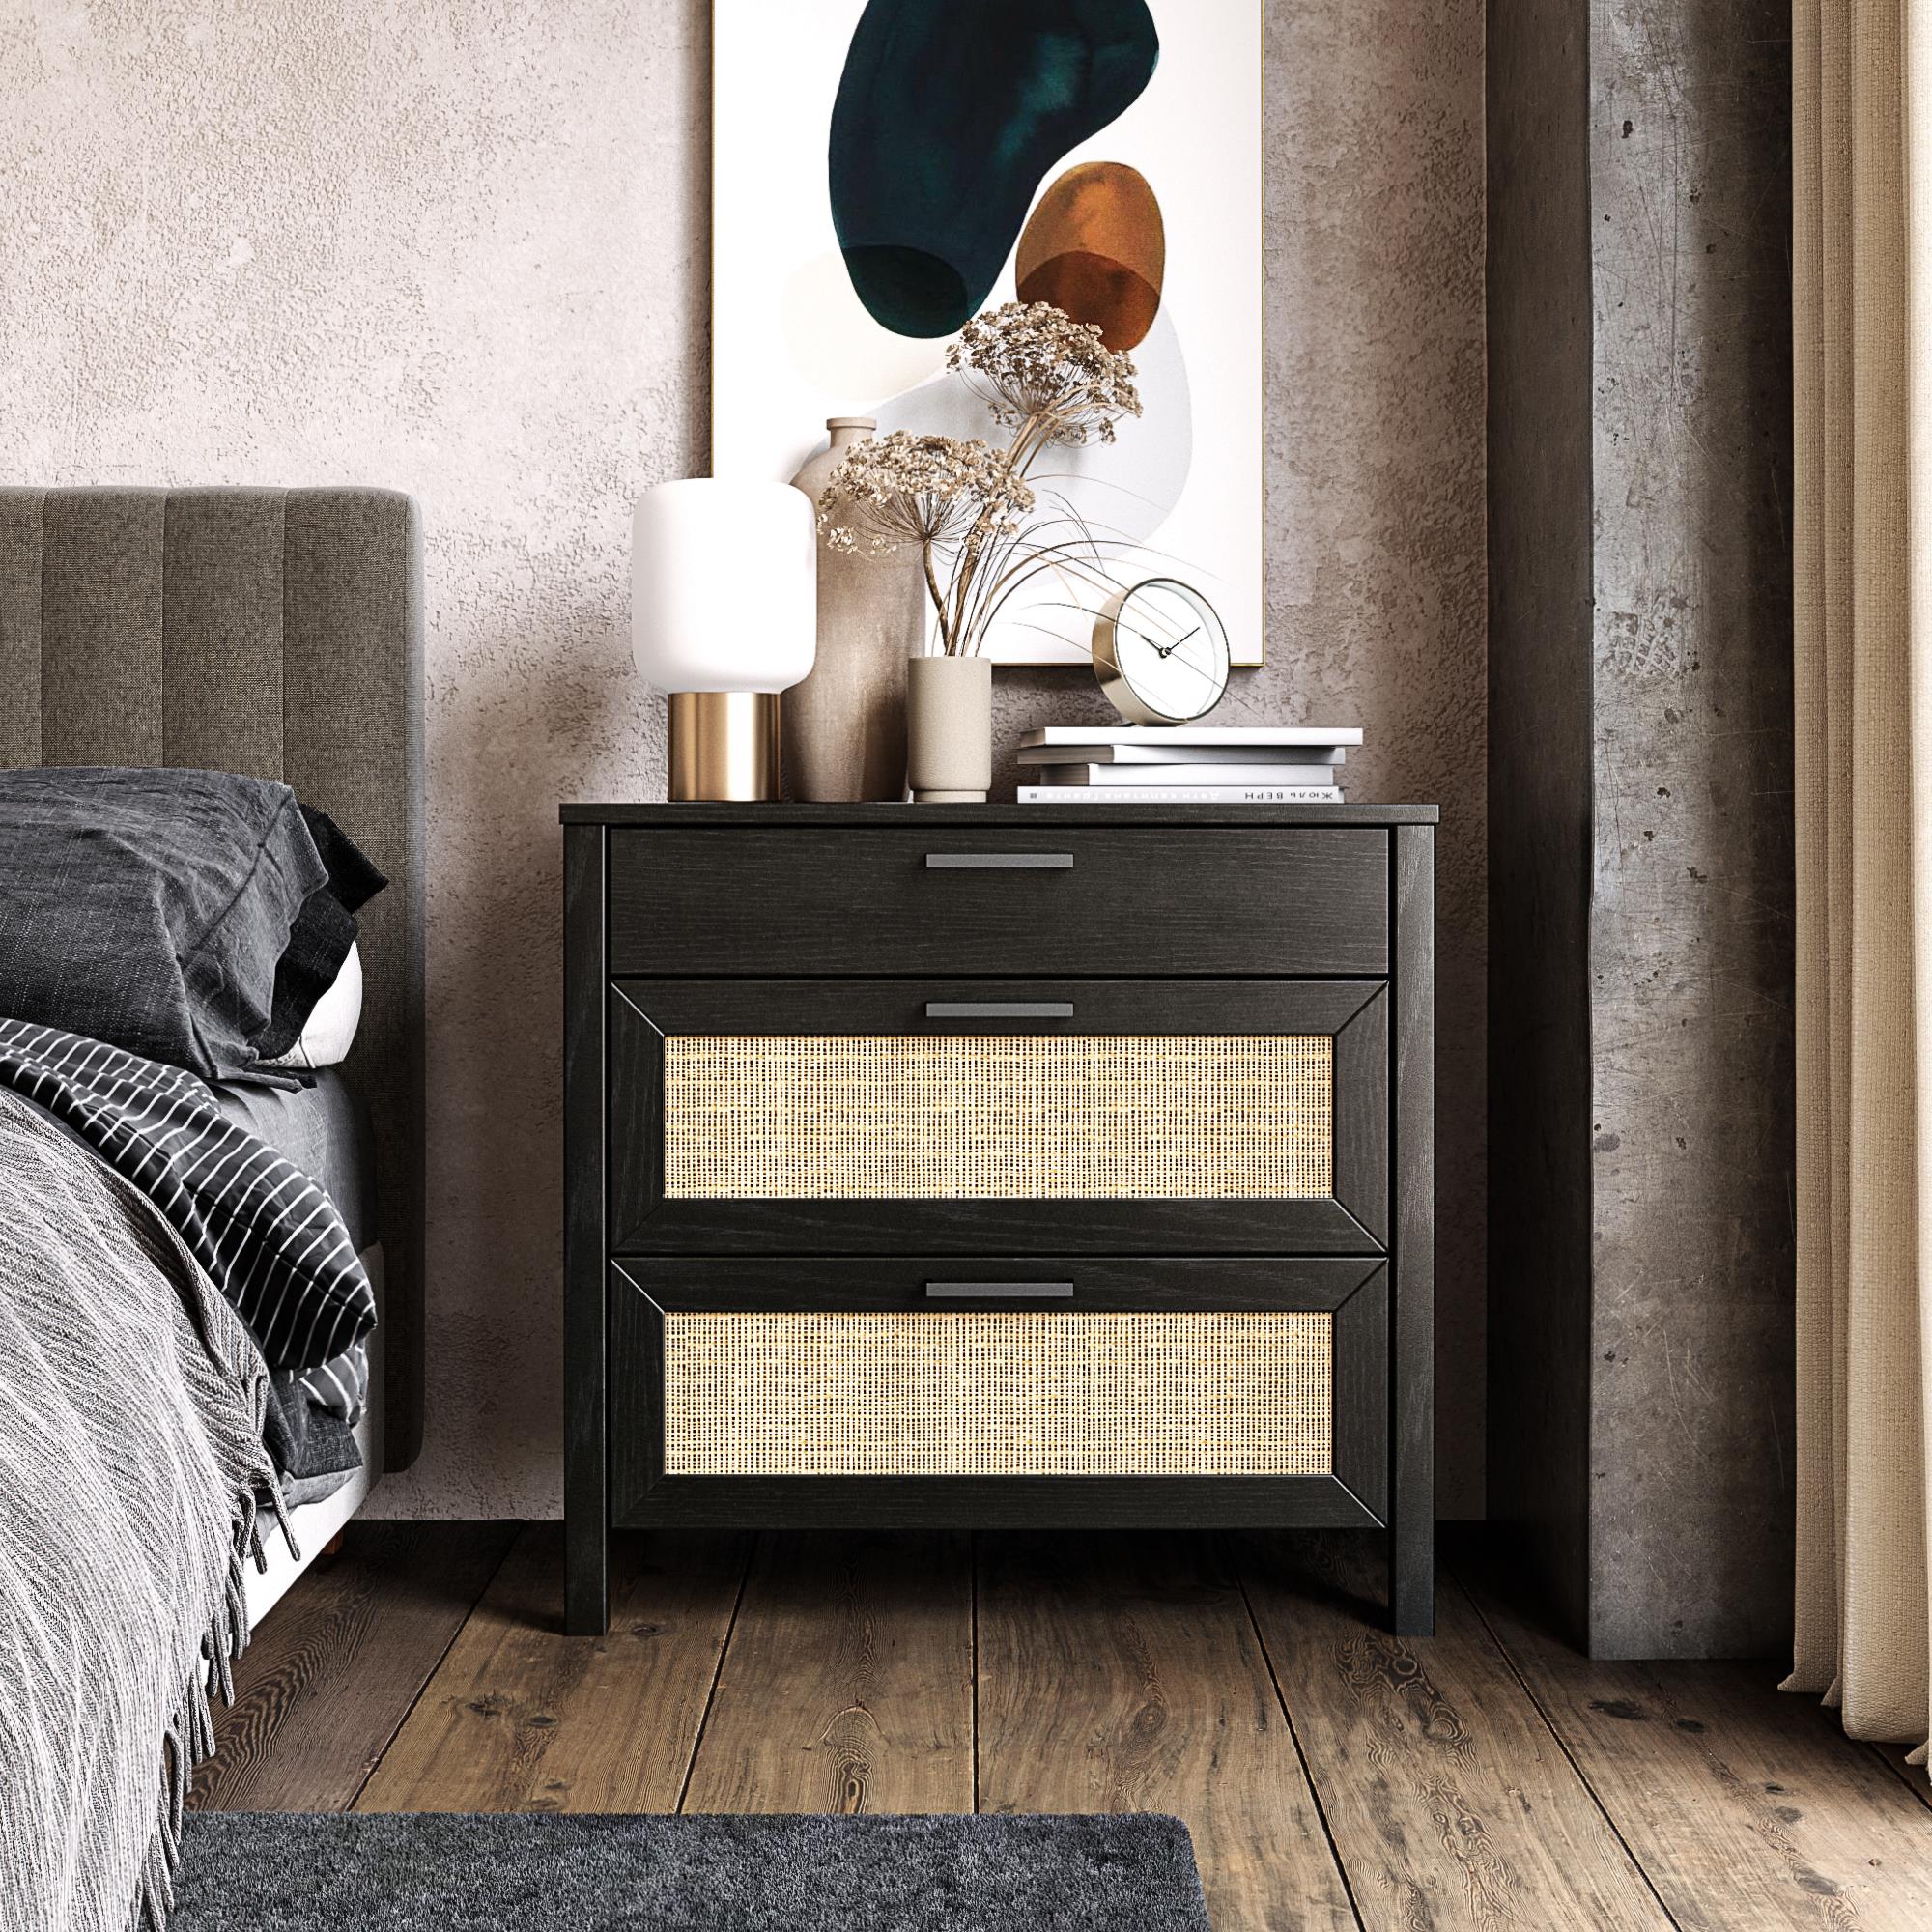 Ameriwood Home Wimberly 3-Drawer Dresser, Black Oak with Faux Rattan - image 1 of 11